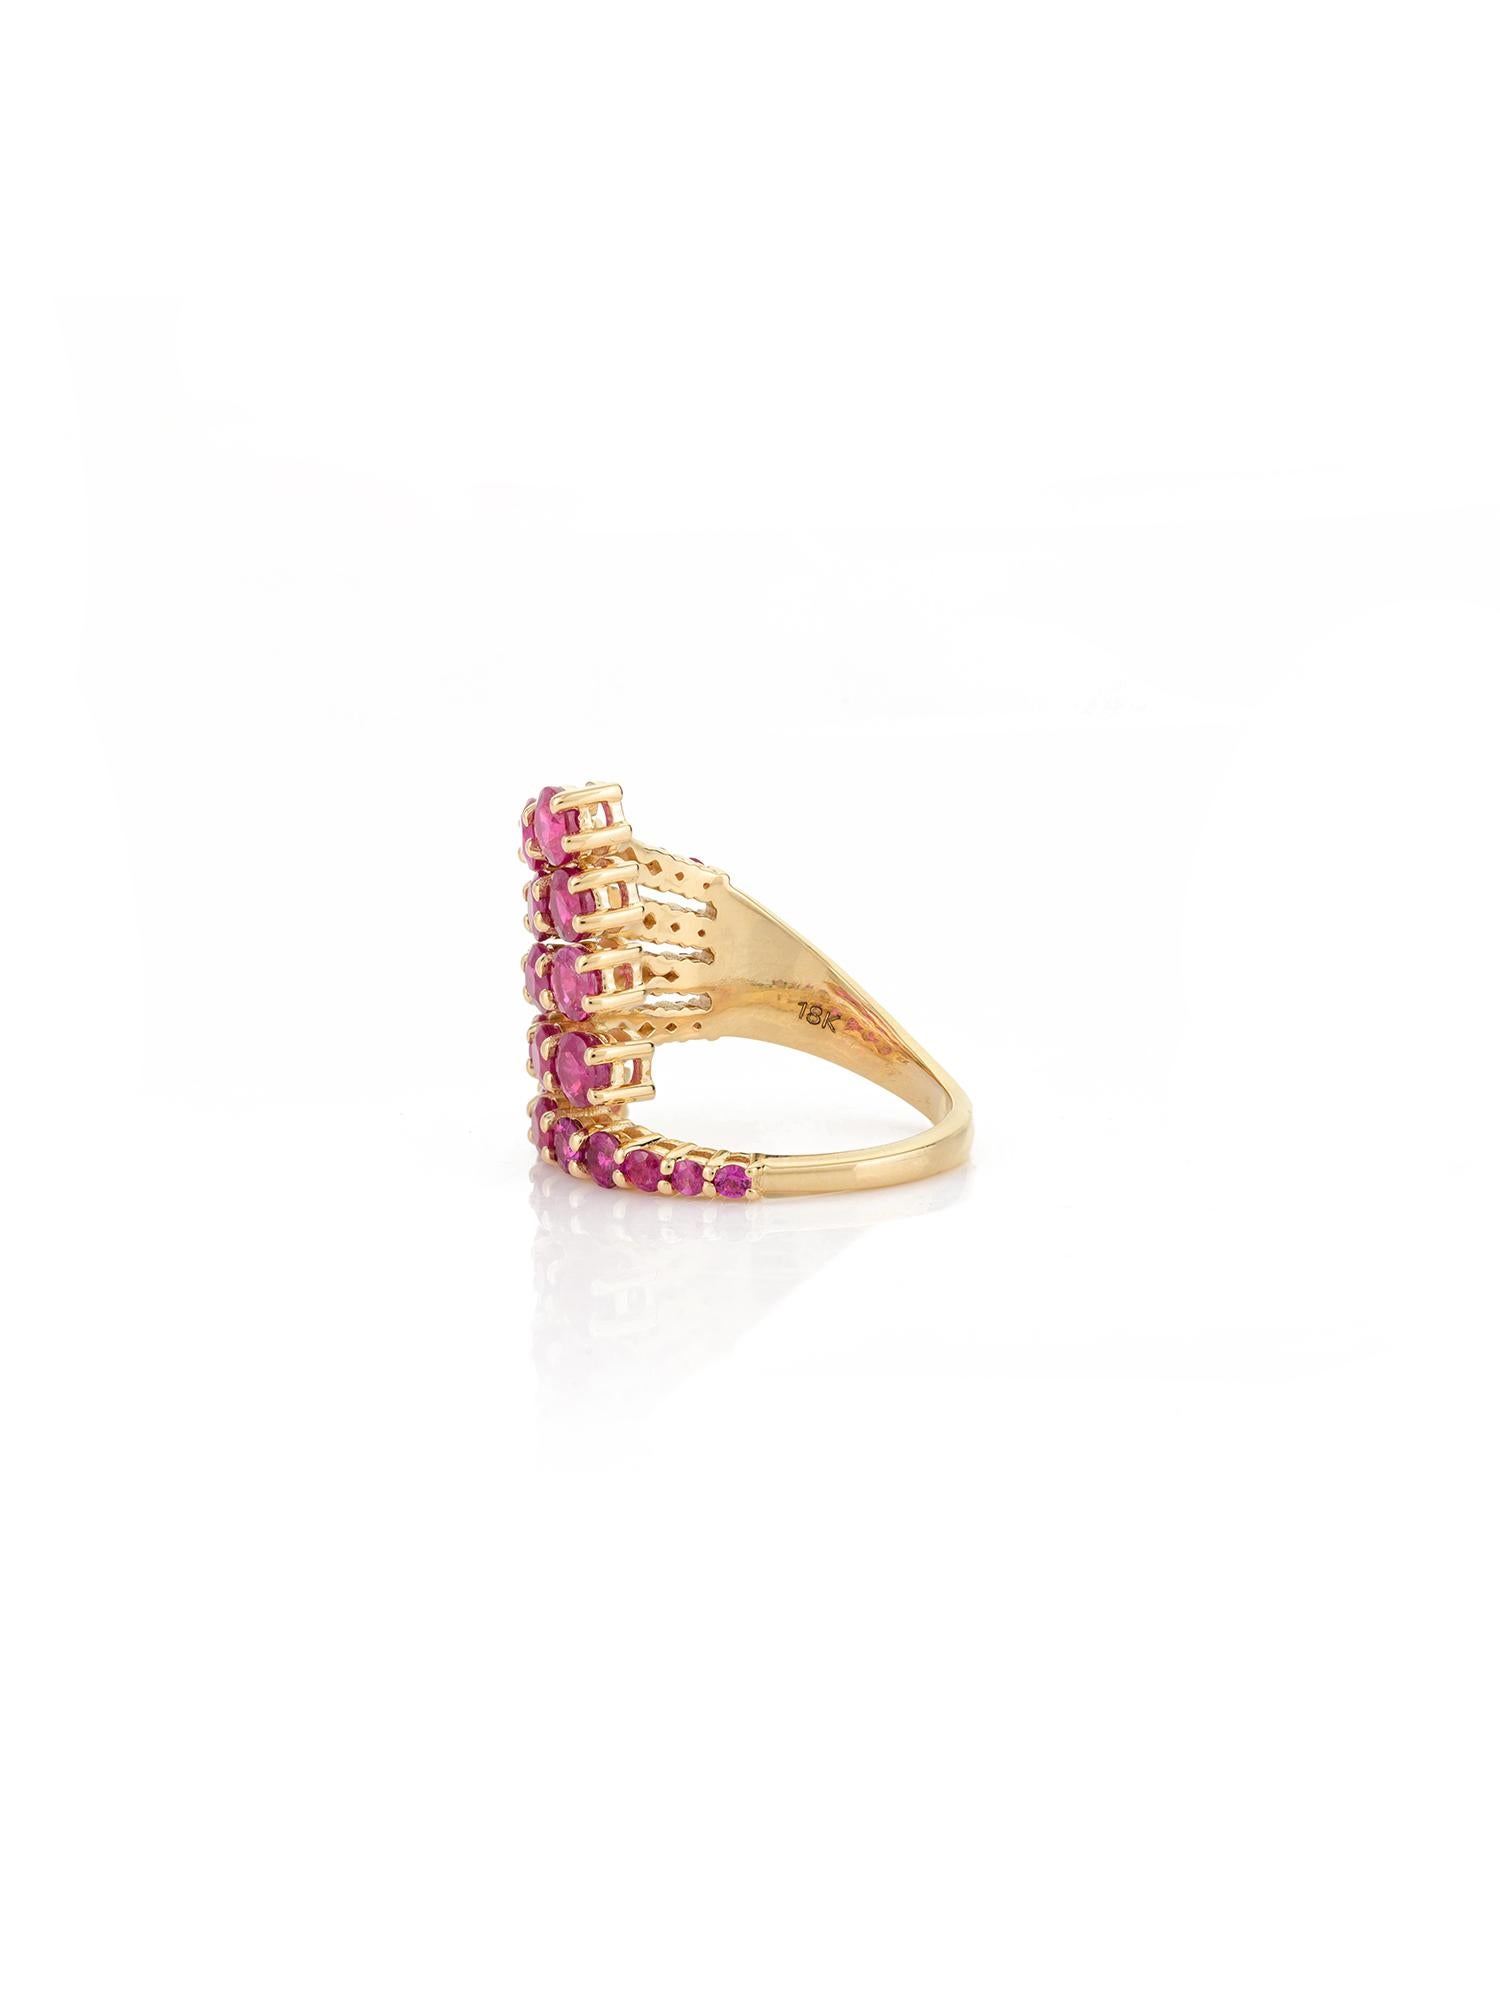 For Sale:  18k Yellow Gold Designer Multi Wrap 5.1 CTW Ruby Cocktail Ring Gift for Women 6